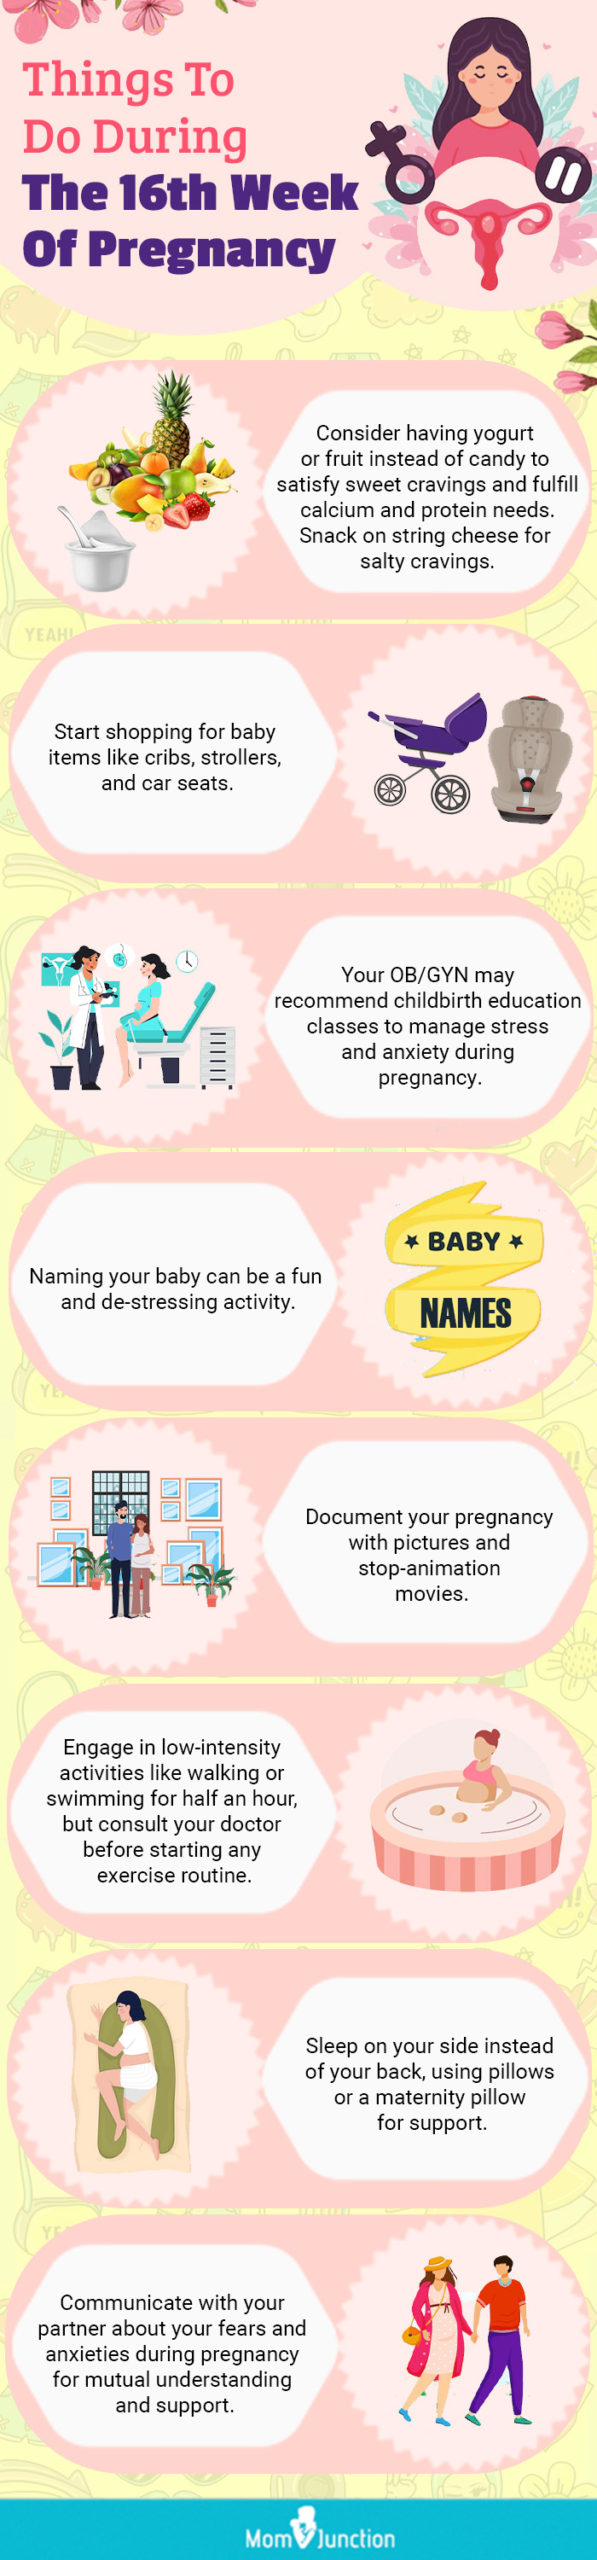 tips for a better 16th-week pregnancy (infographic)